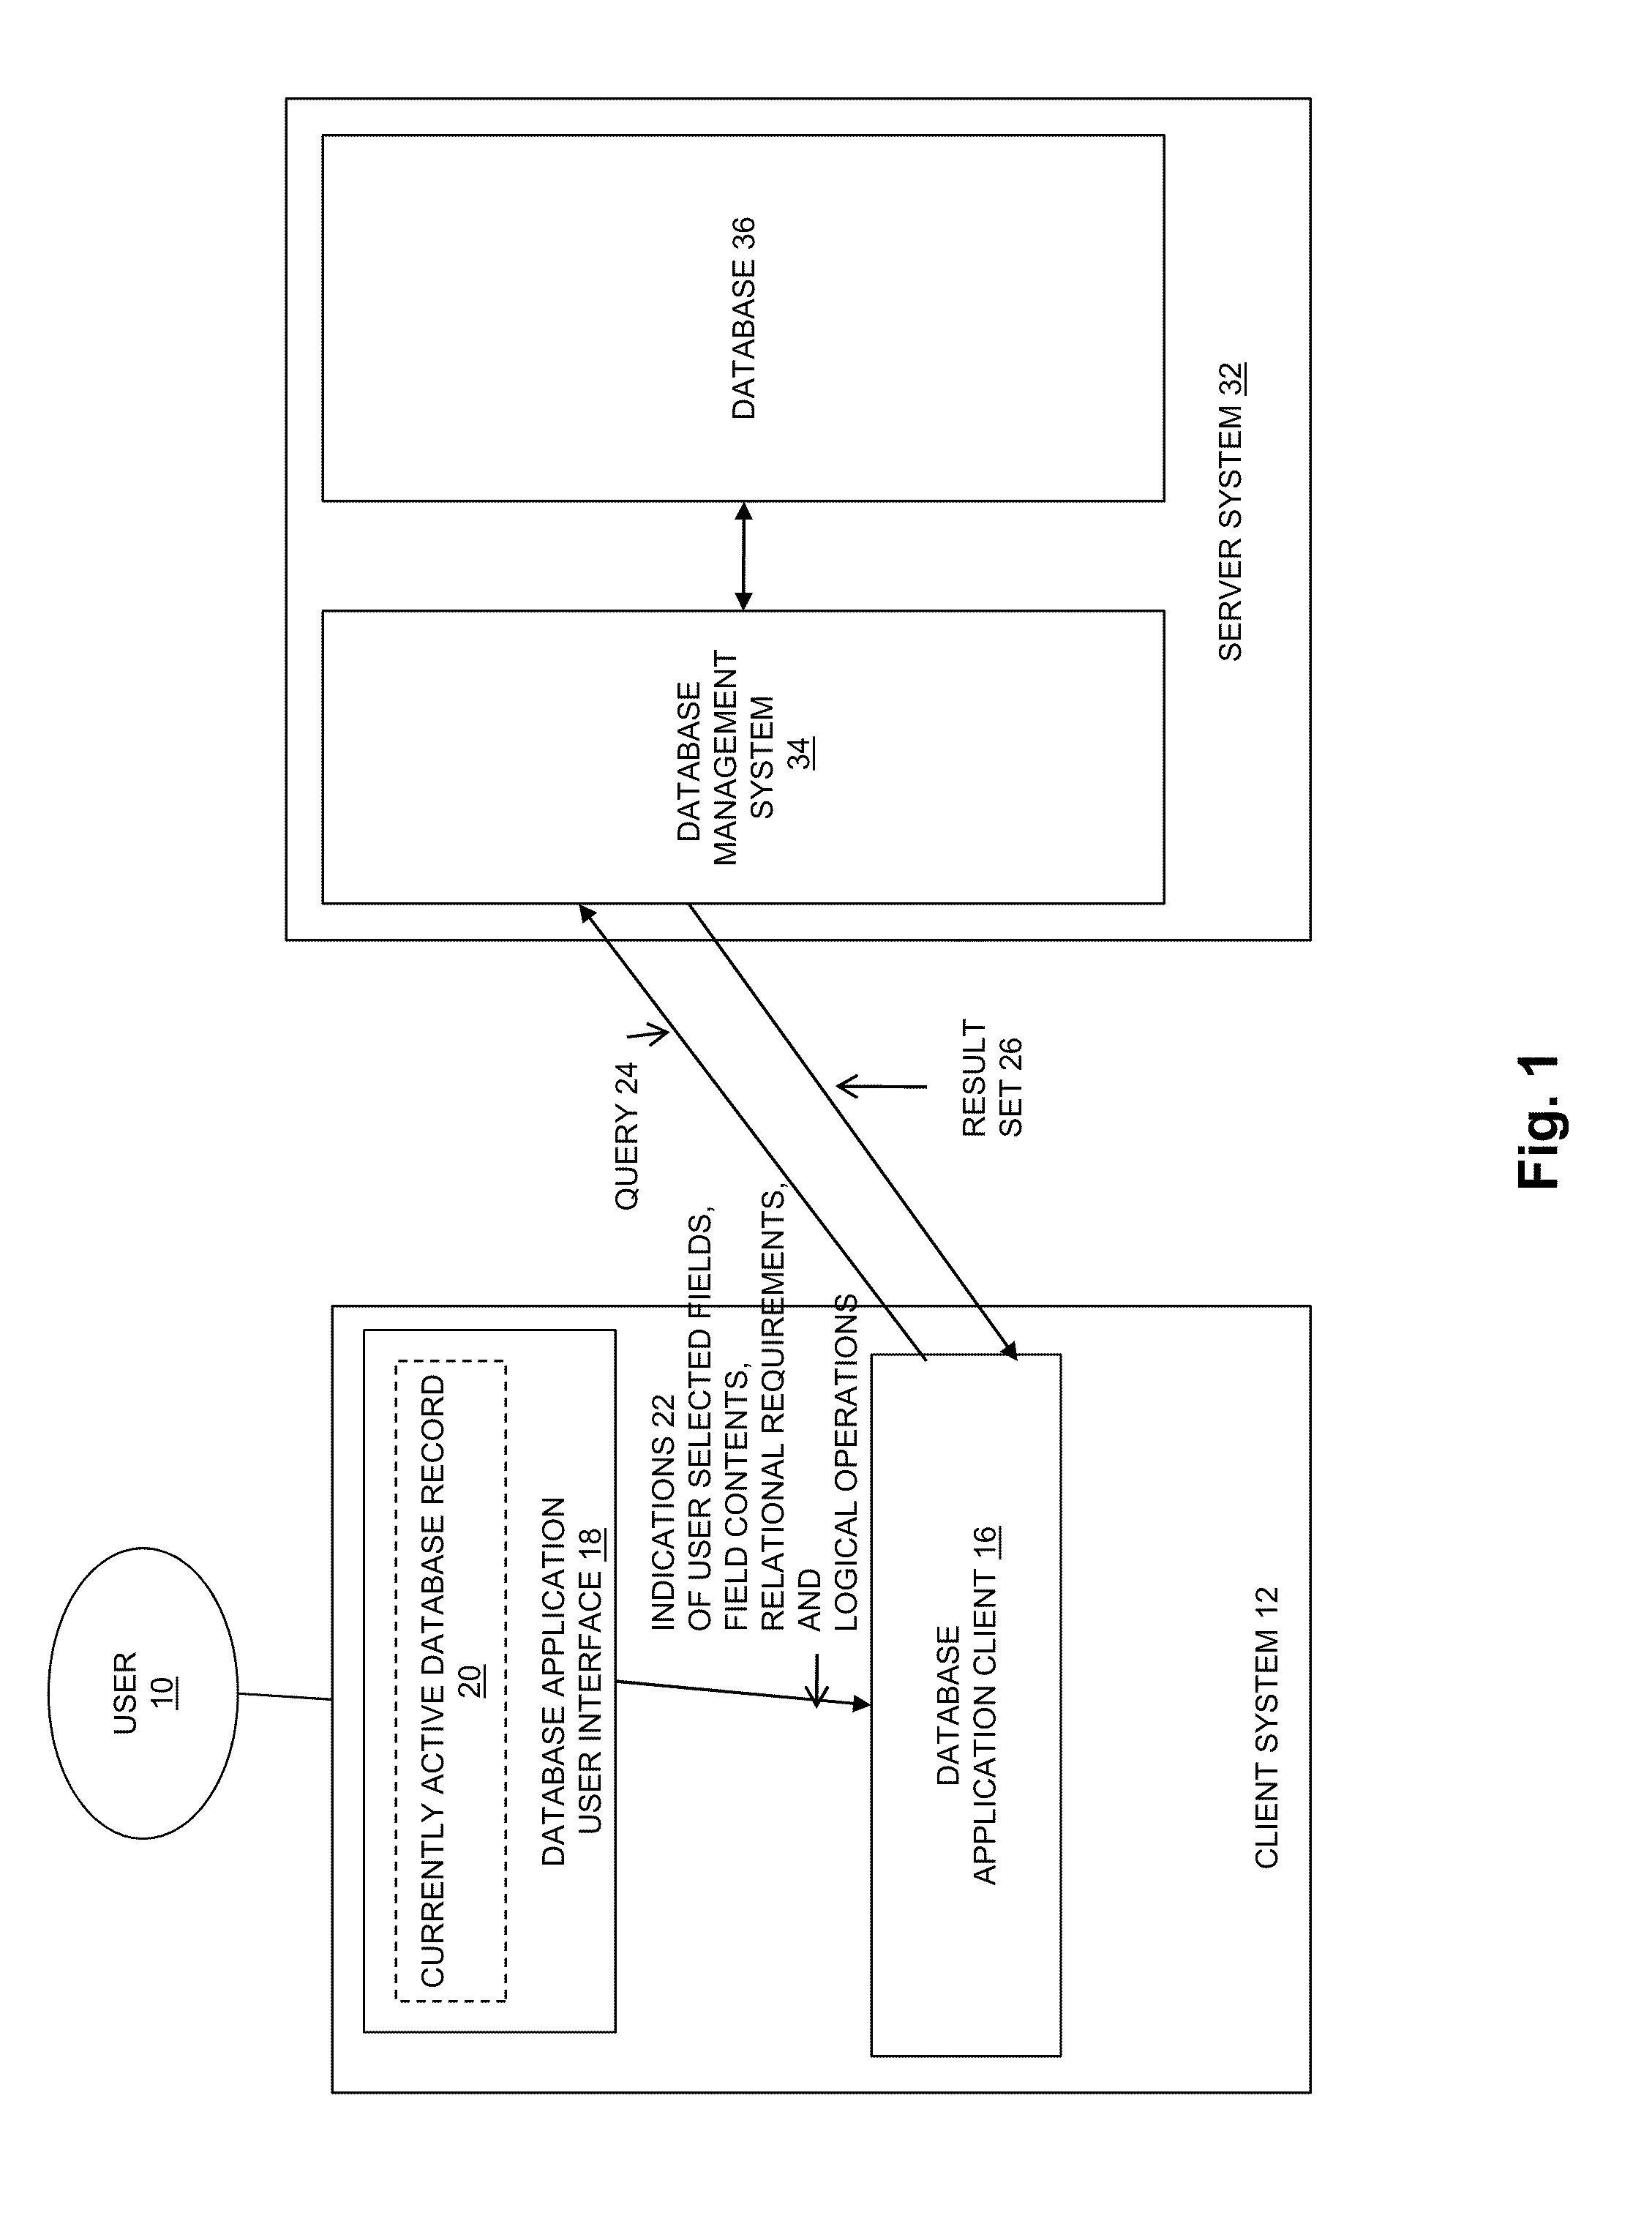 Method and system to dynamically create queries to find related records in a database